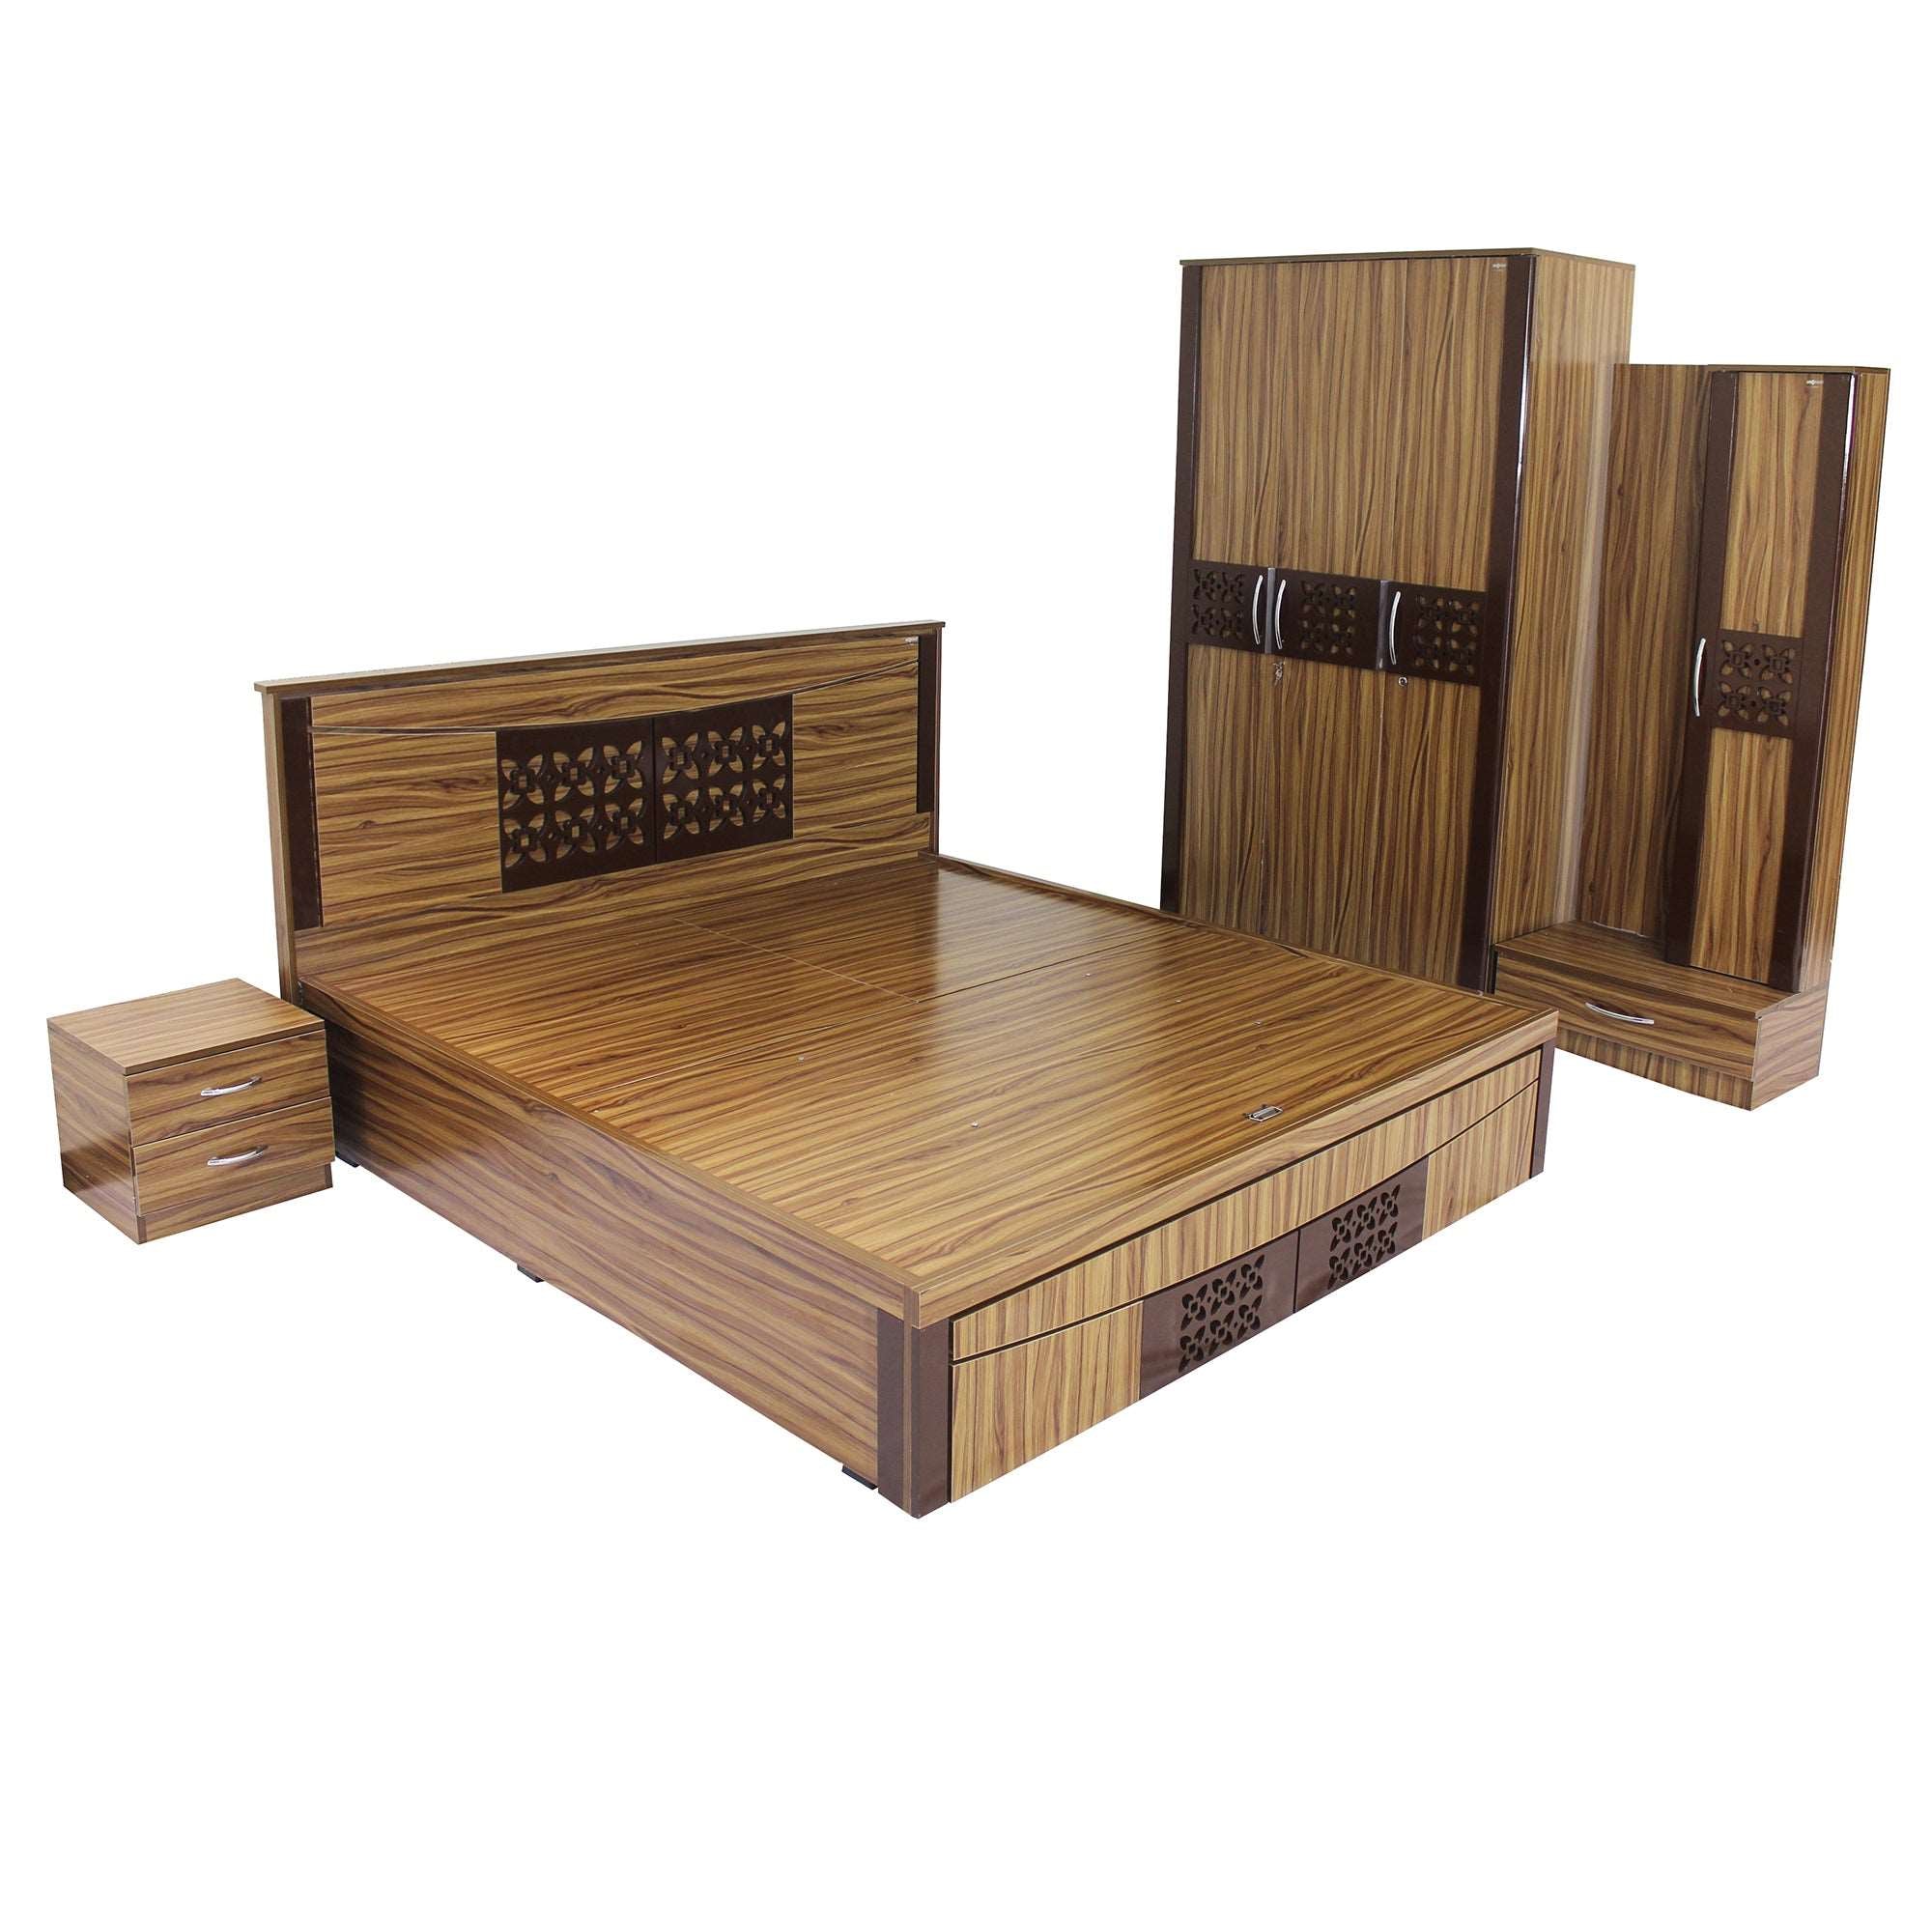 Aura King Size Bedroom Set with 3 Door Wardrobe, Dressing and Side Table